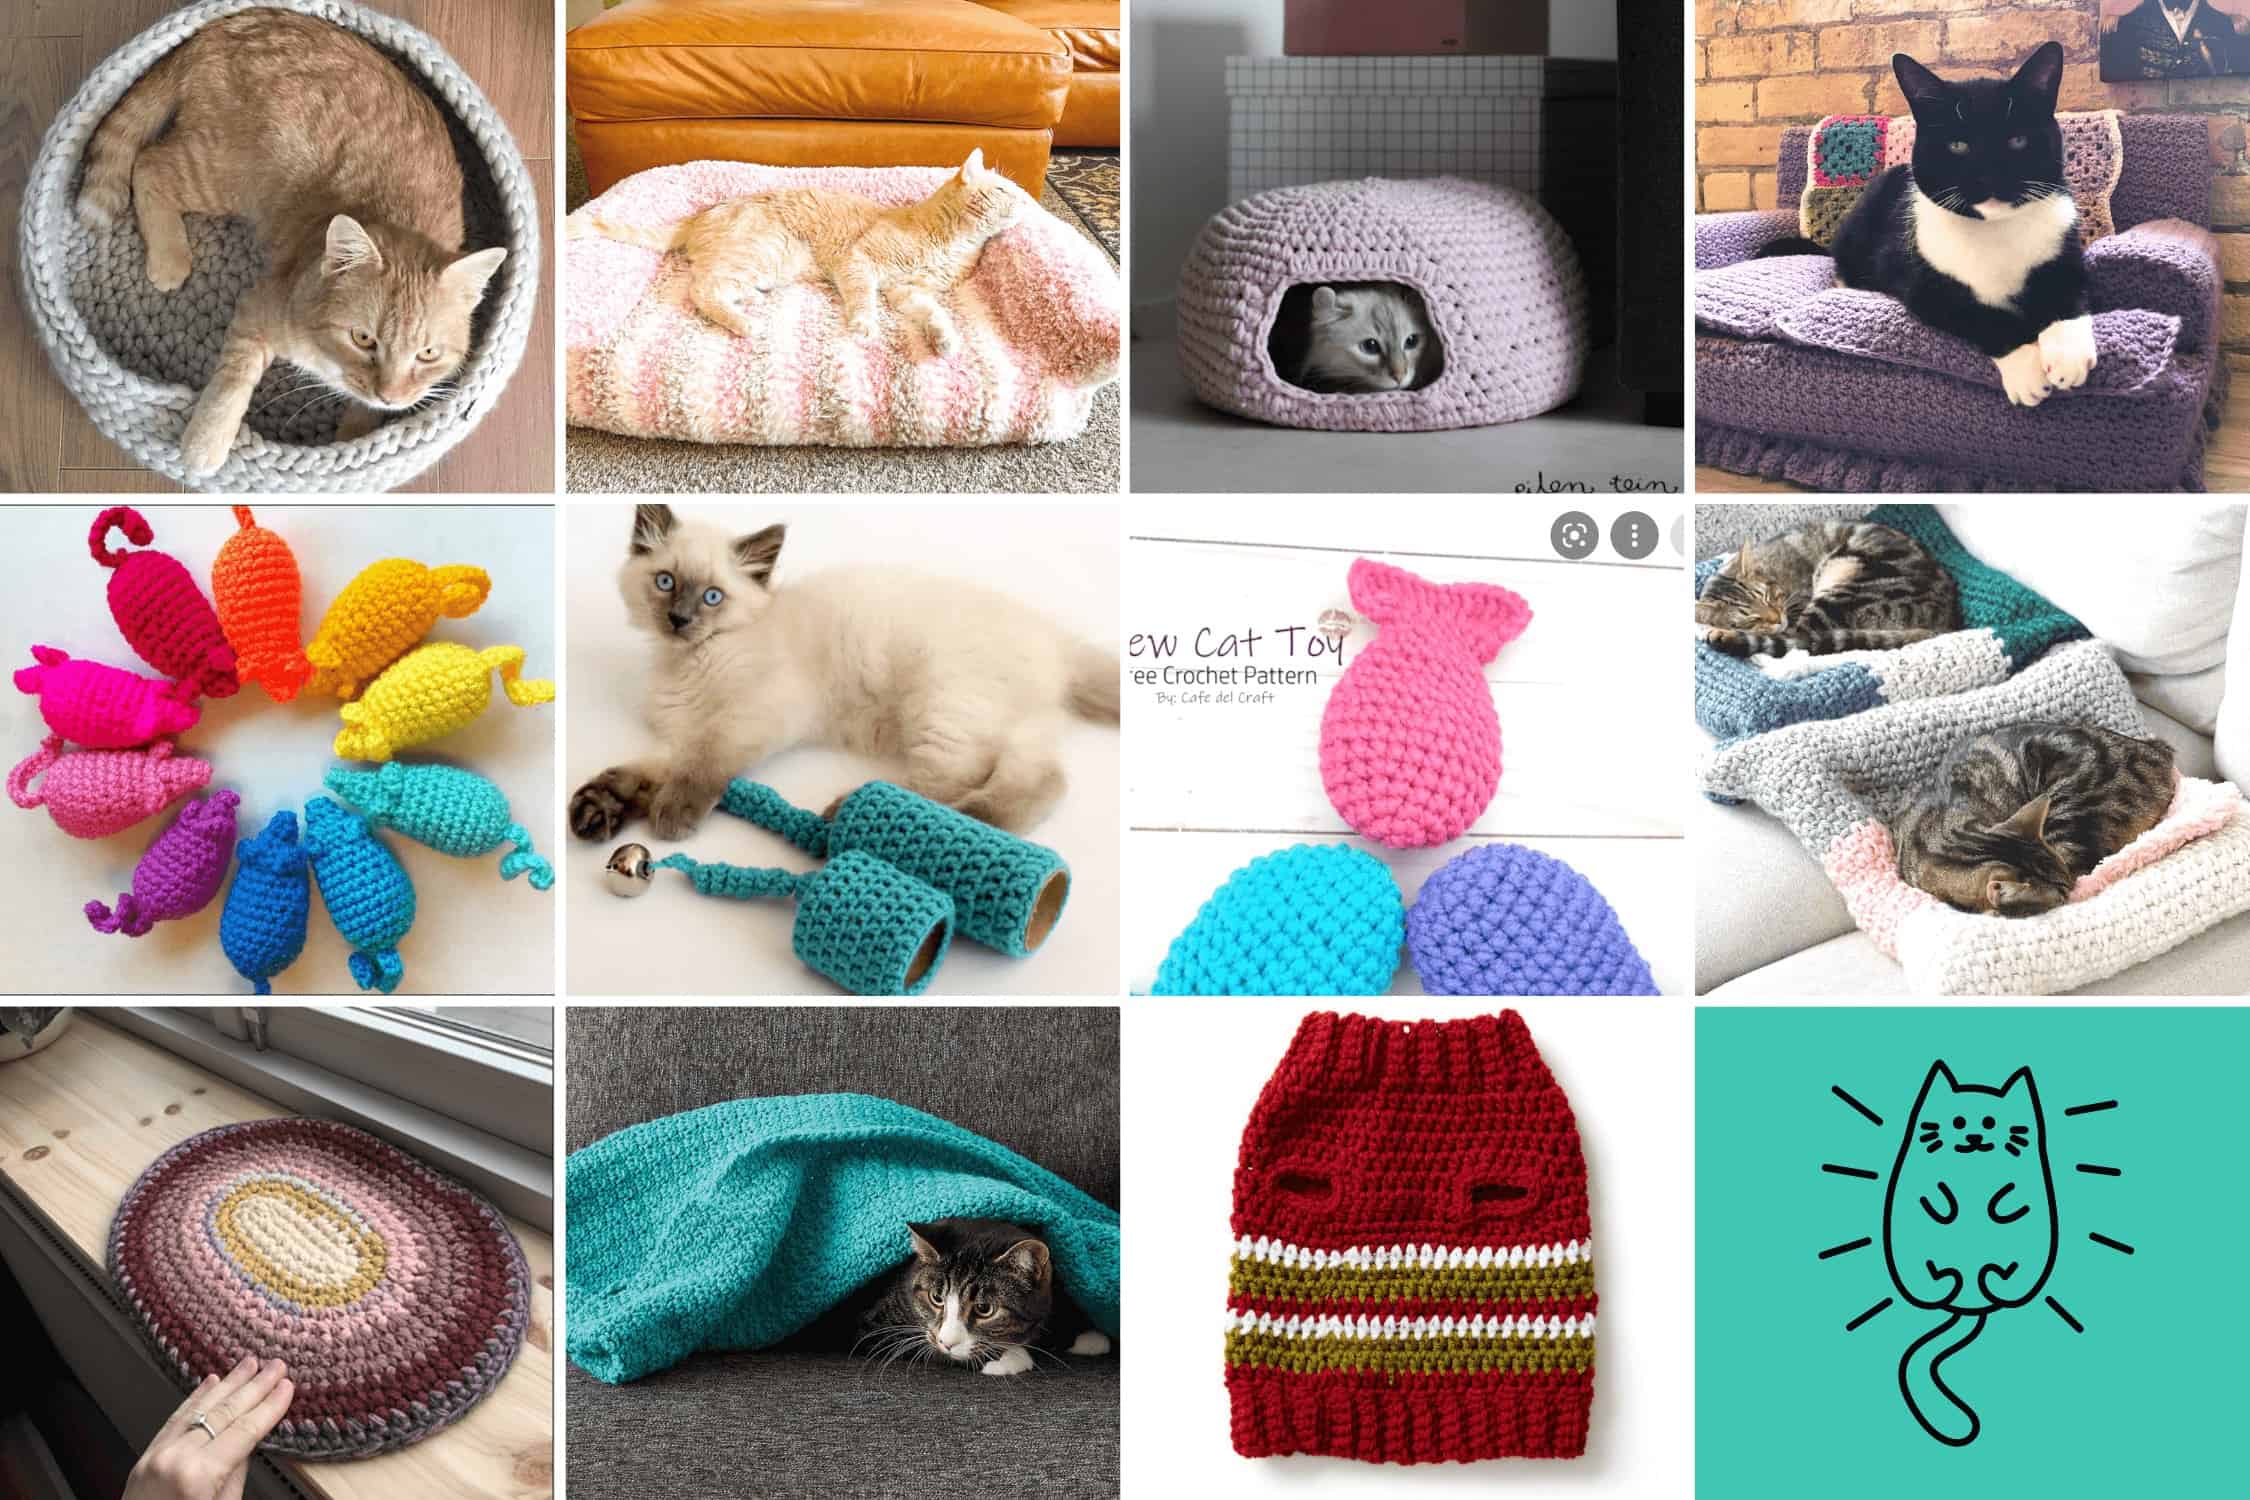 Practical Crochet Items for Cats